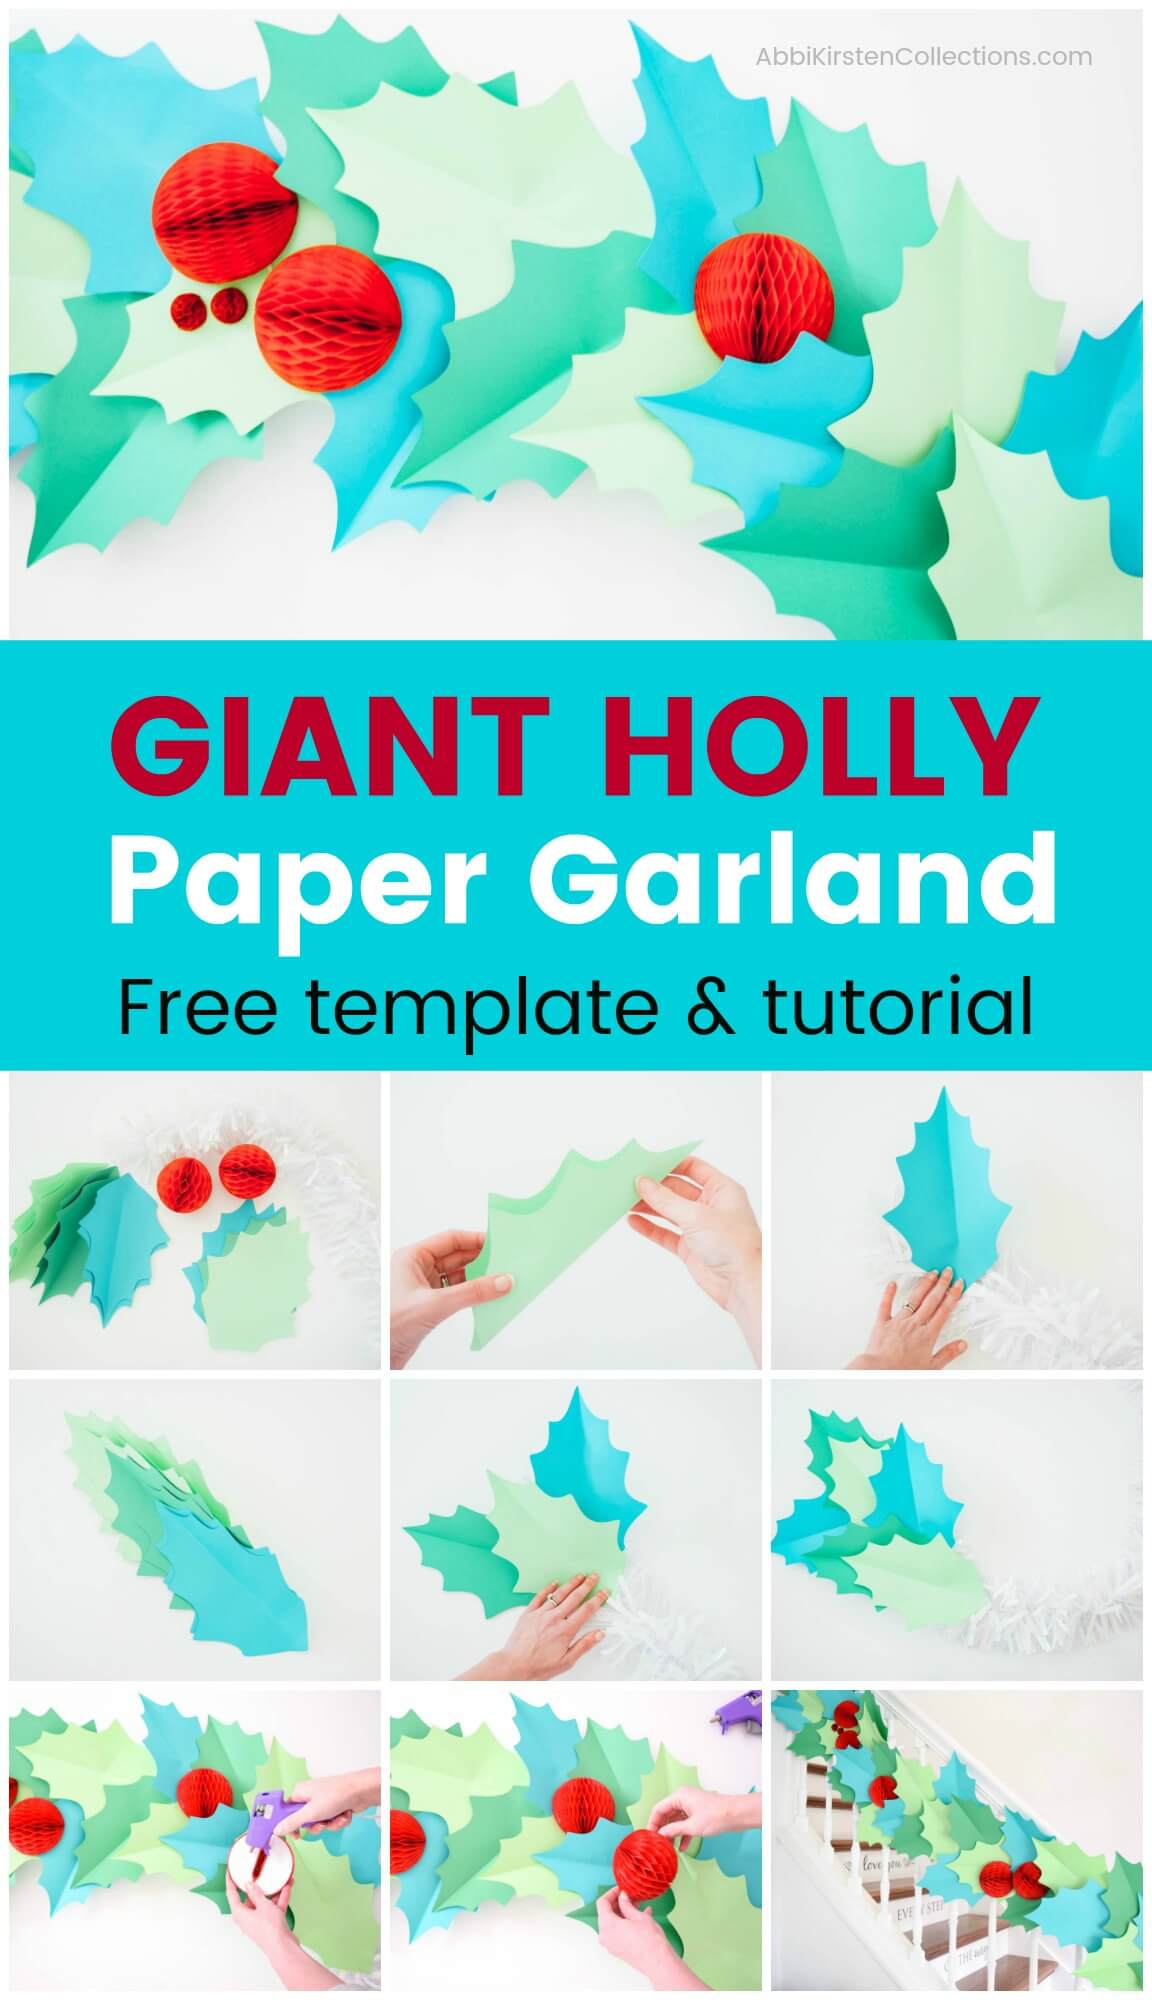 DIY Christmas Garland - How to Make Giant Paper Holly Garland to deck your halls and walls for the Holidays. Download your free holly template!